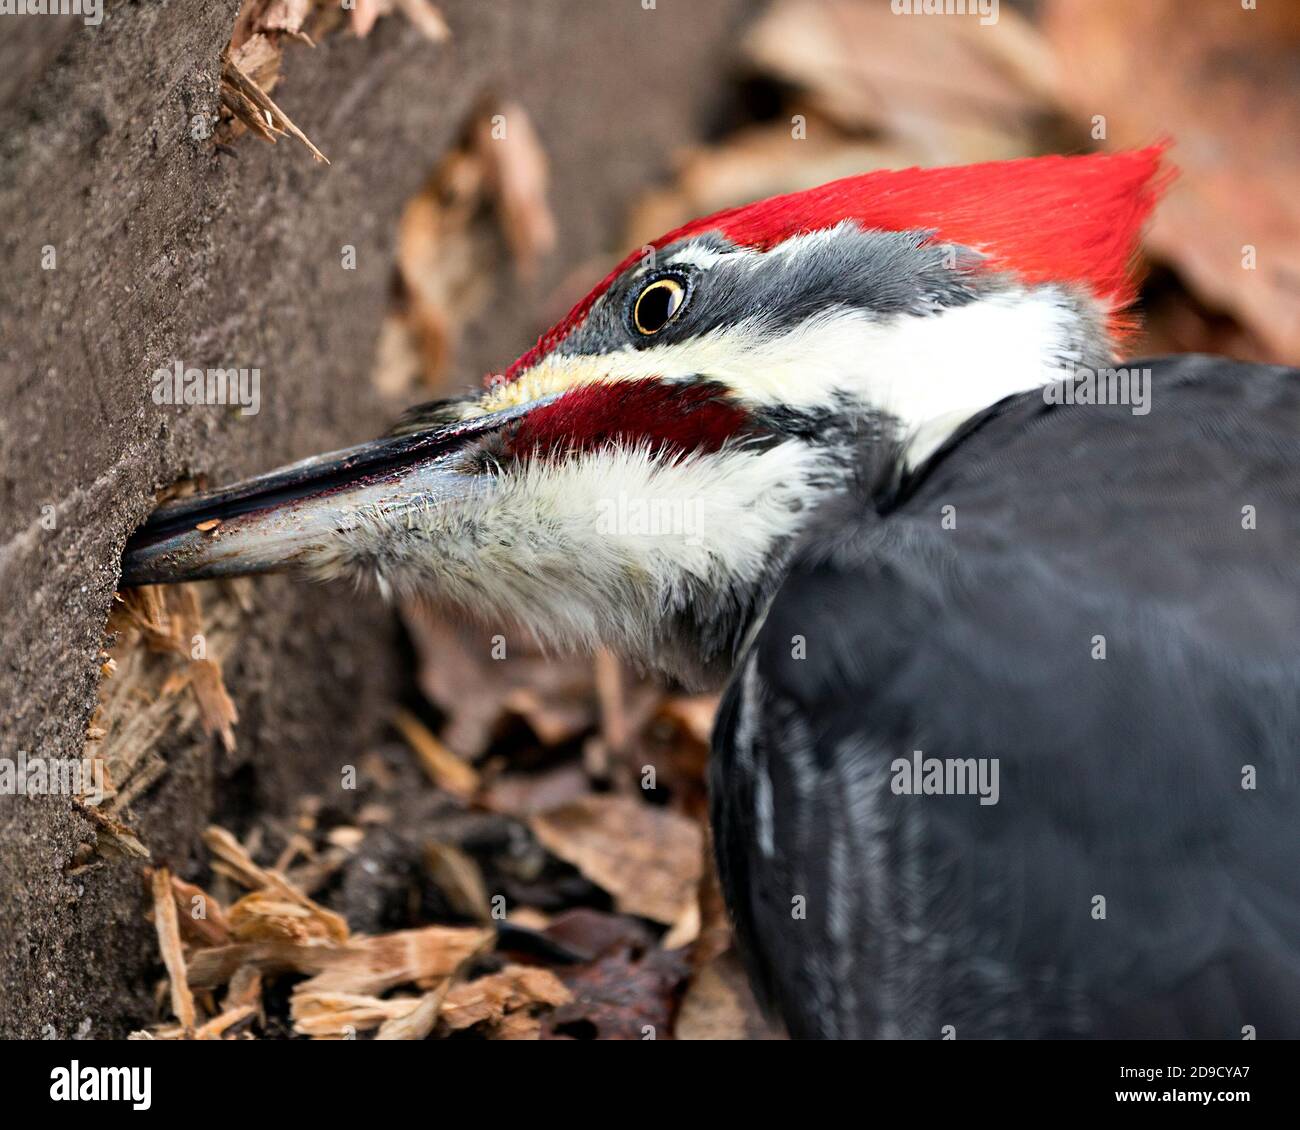 Woodpecker head close-up profile view with a blur background woodpeckers making holes in wood siding in its environment and habitat. Stock Photo